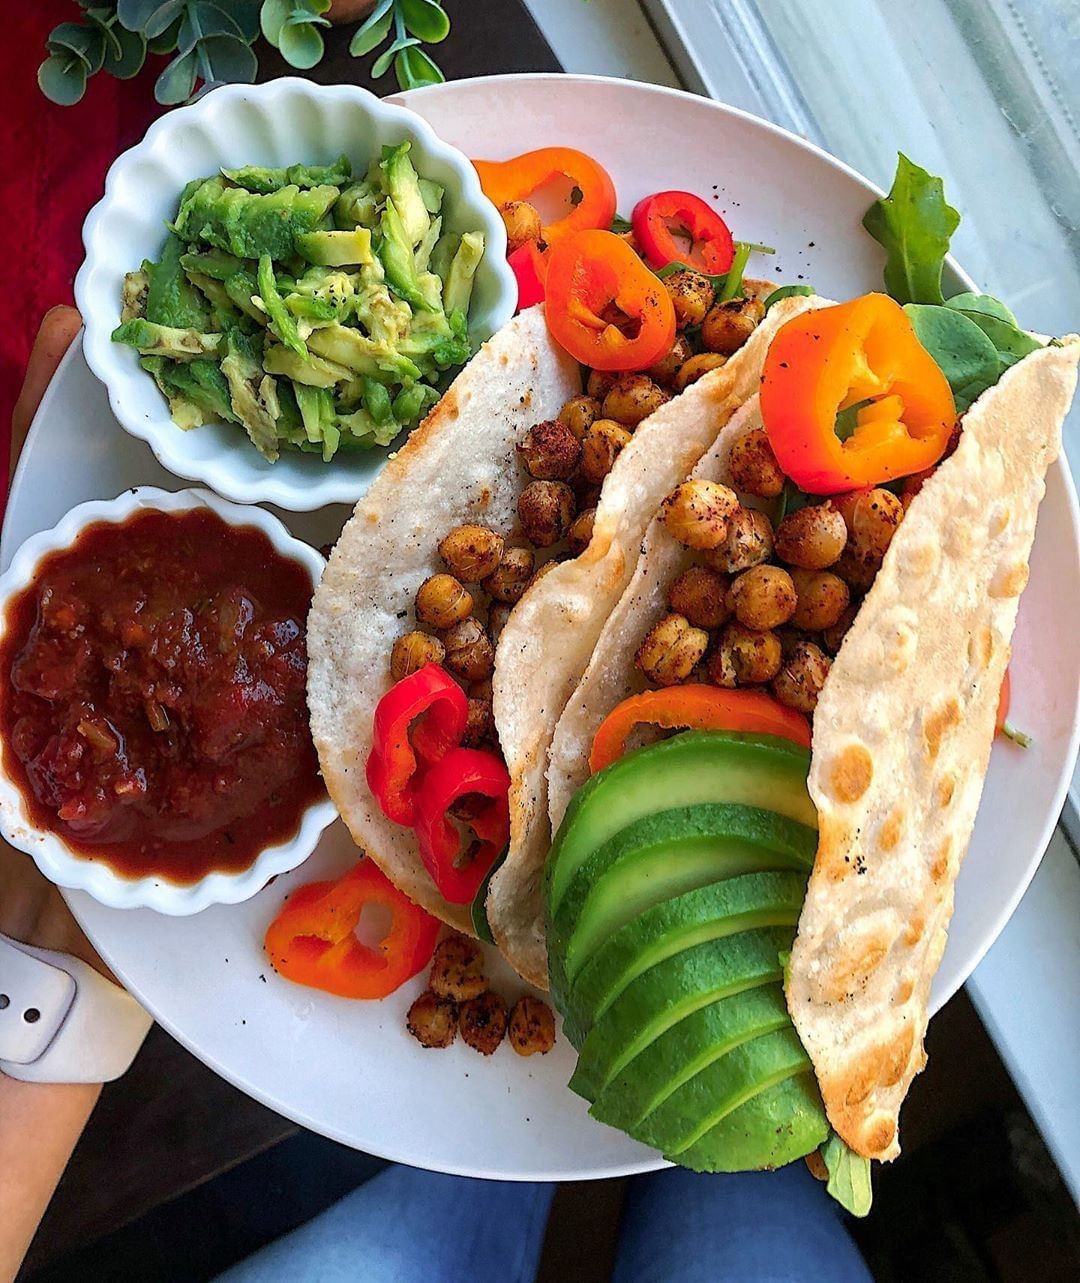 15 minute meatless Monday dinner over here. Chickpea tacos  with avocado + salsa on the side